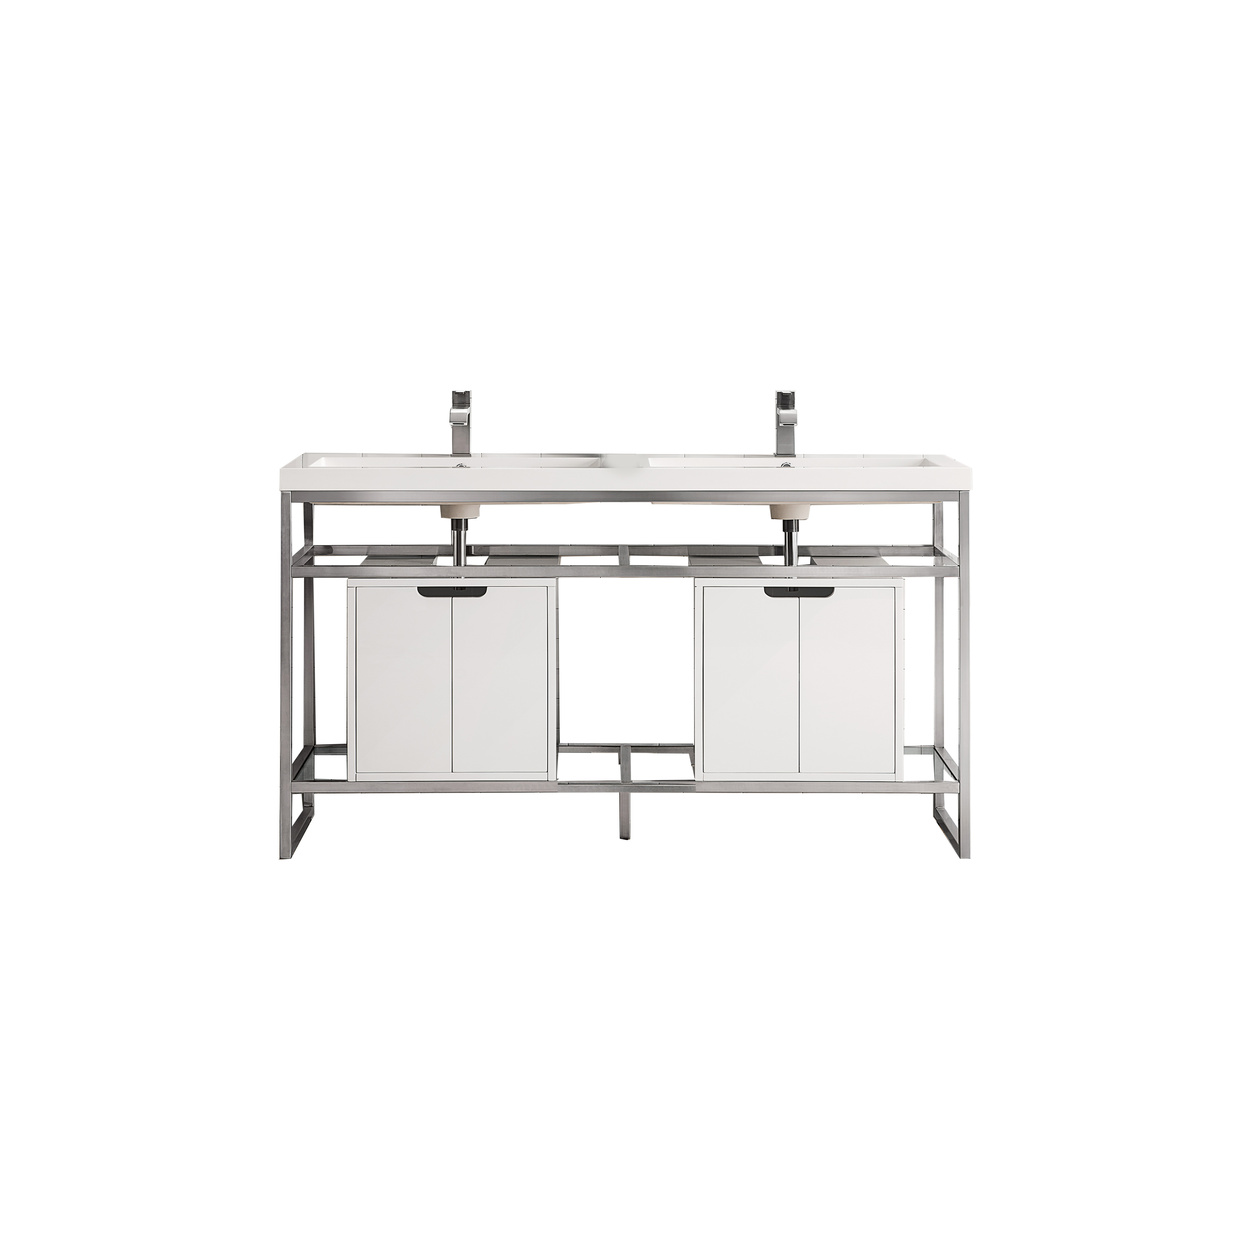 james martin boston 63" stainless steel sink console (double basins), brushed nickel